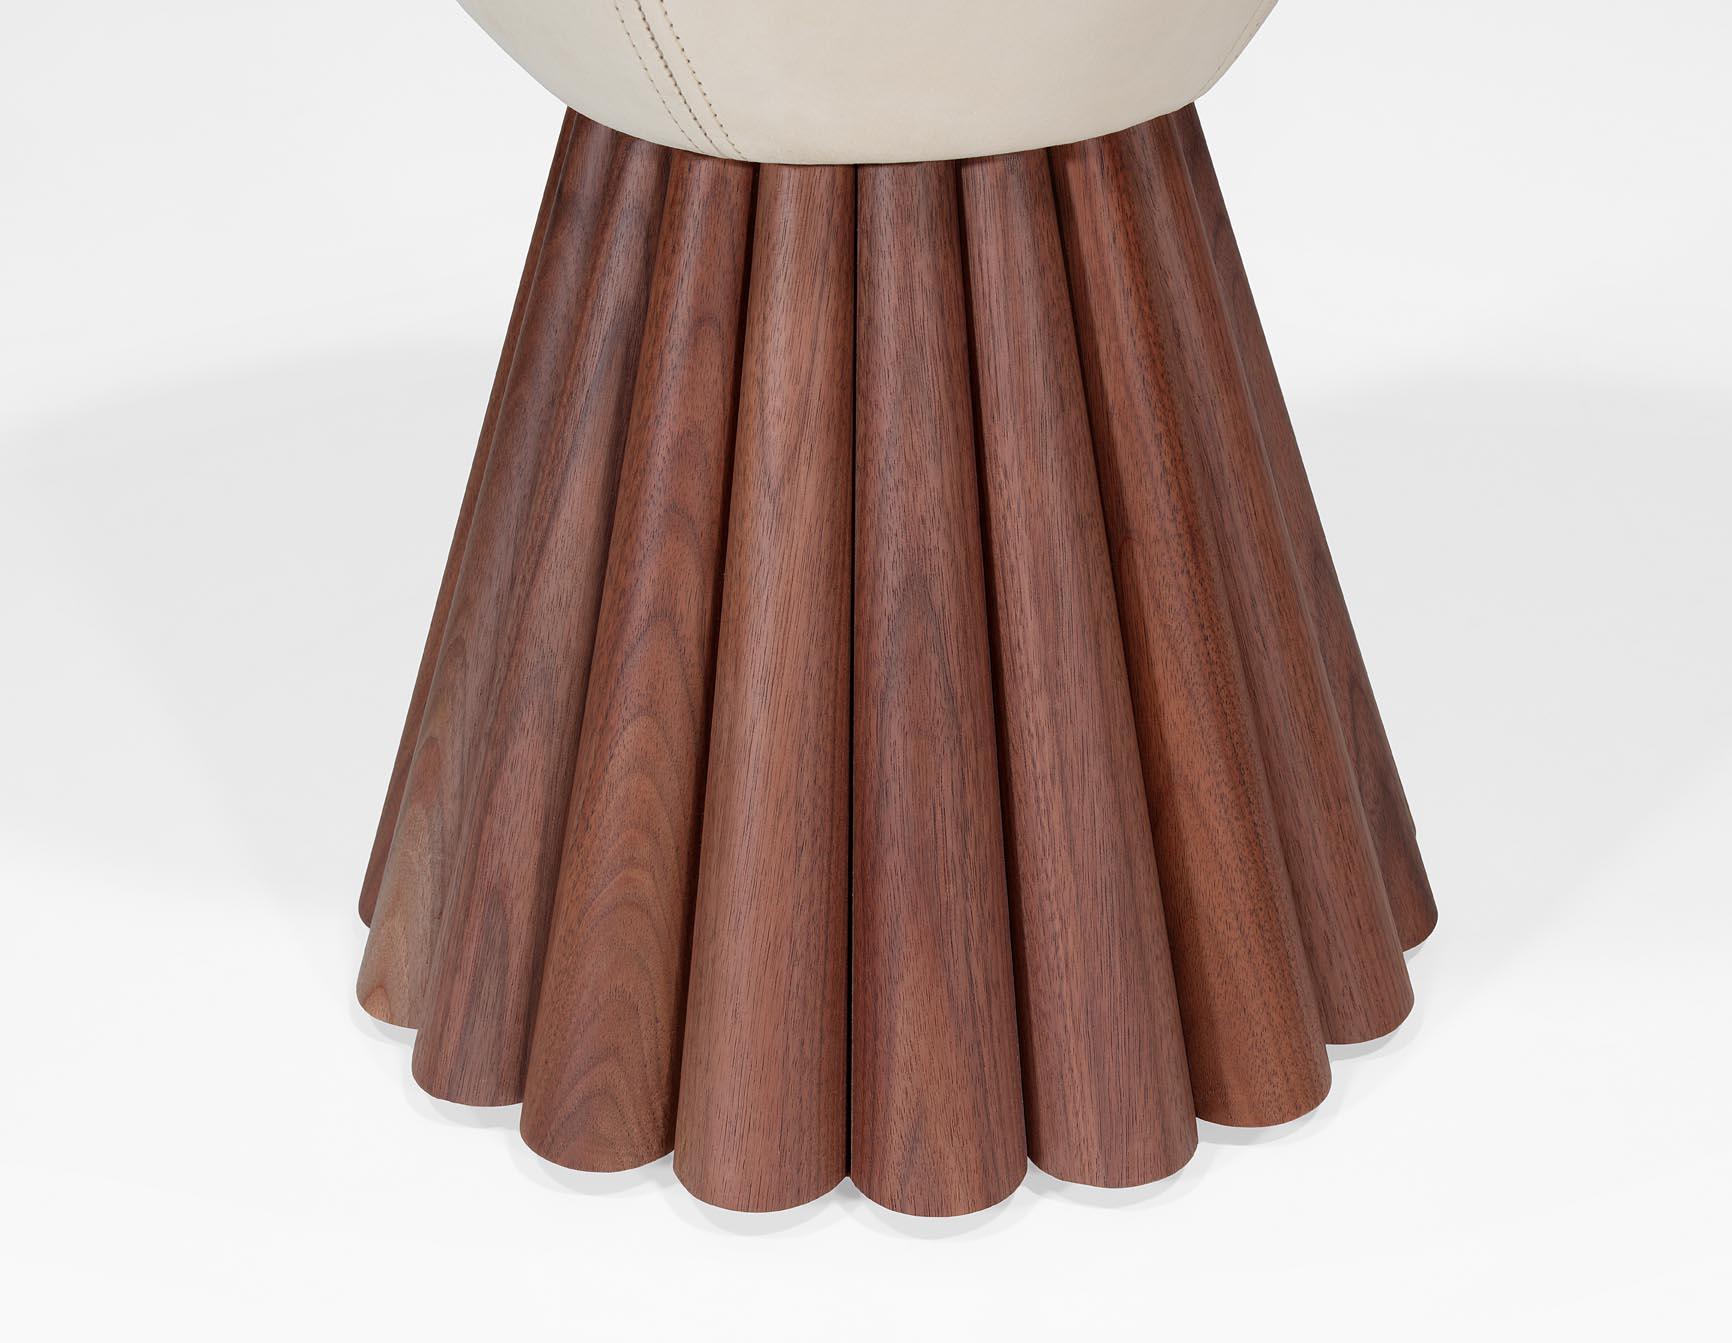 A true statement of luxury
Combining the finest and ancient craftsmanship with luxurious levels of design, quality, and comfort. 

Al-Shaykh Stool, Modern Collection, Walnut Wood, Suede Fabric - Traditional Handcrafted in Portugal 

It is made